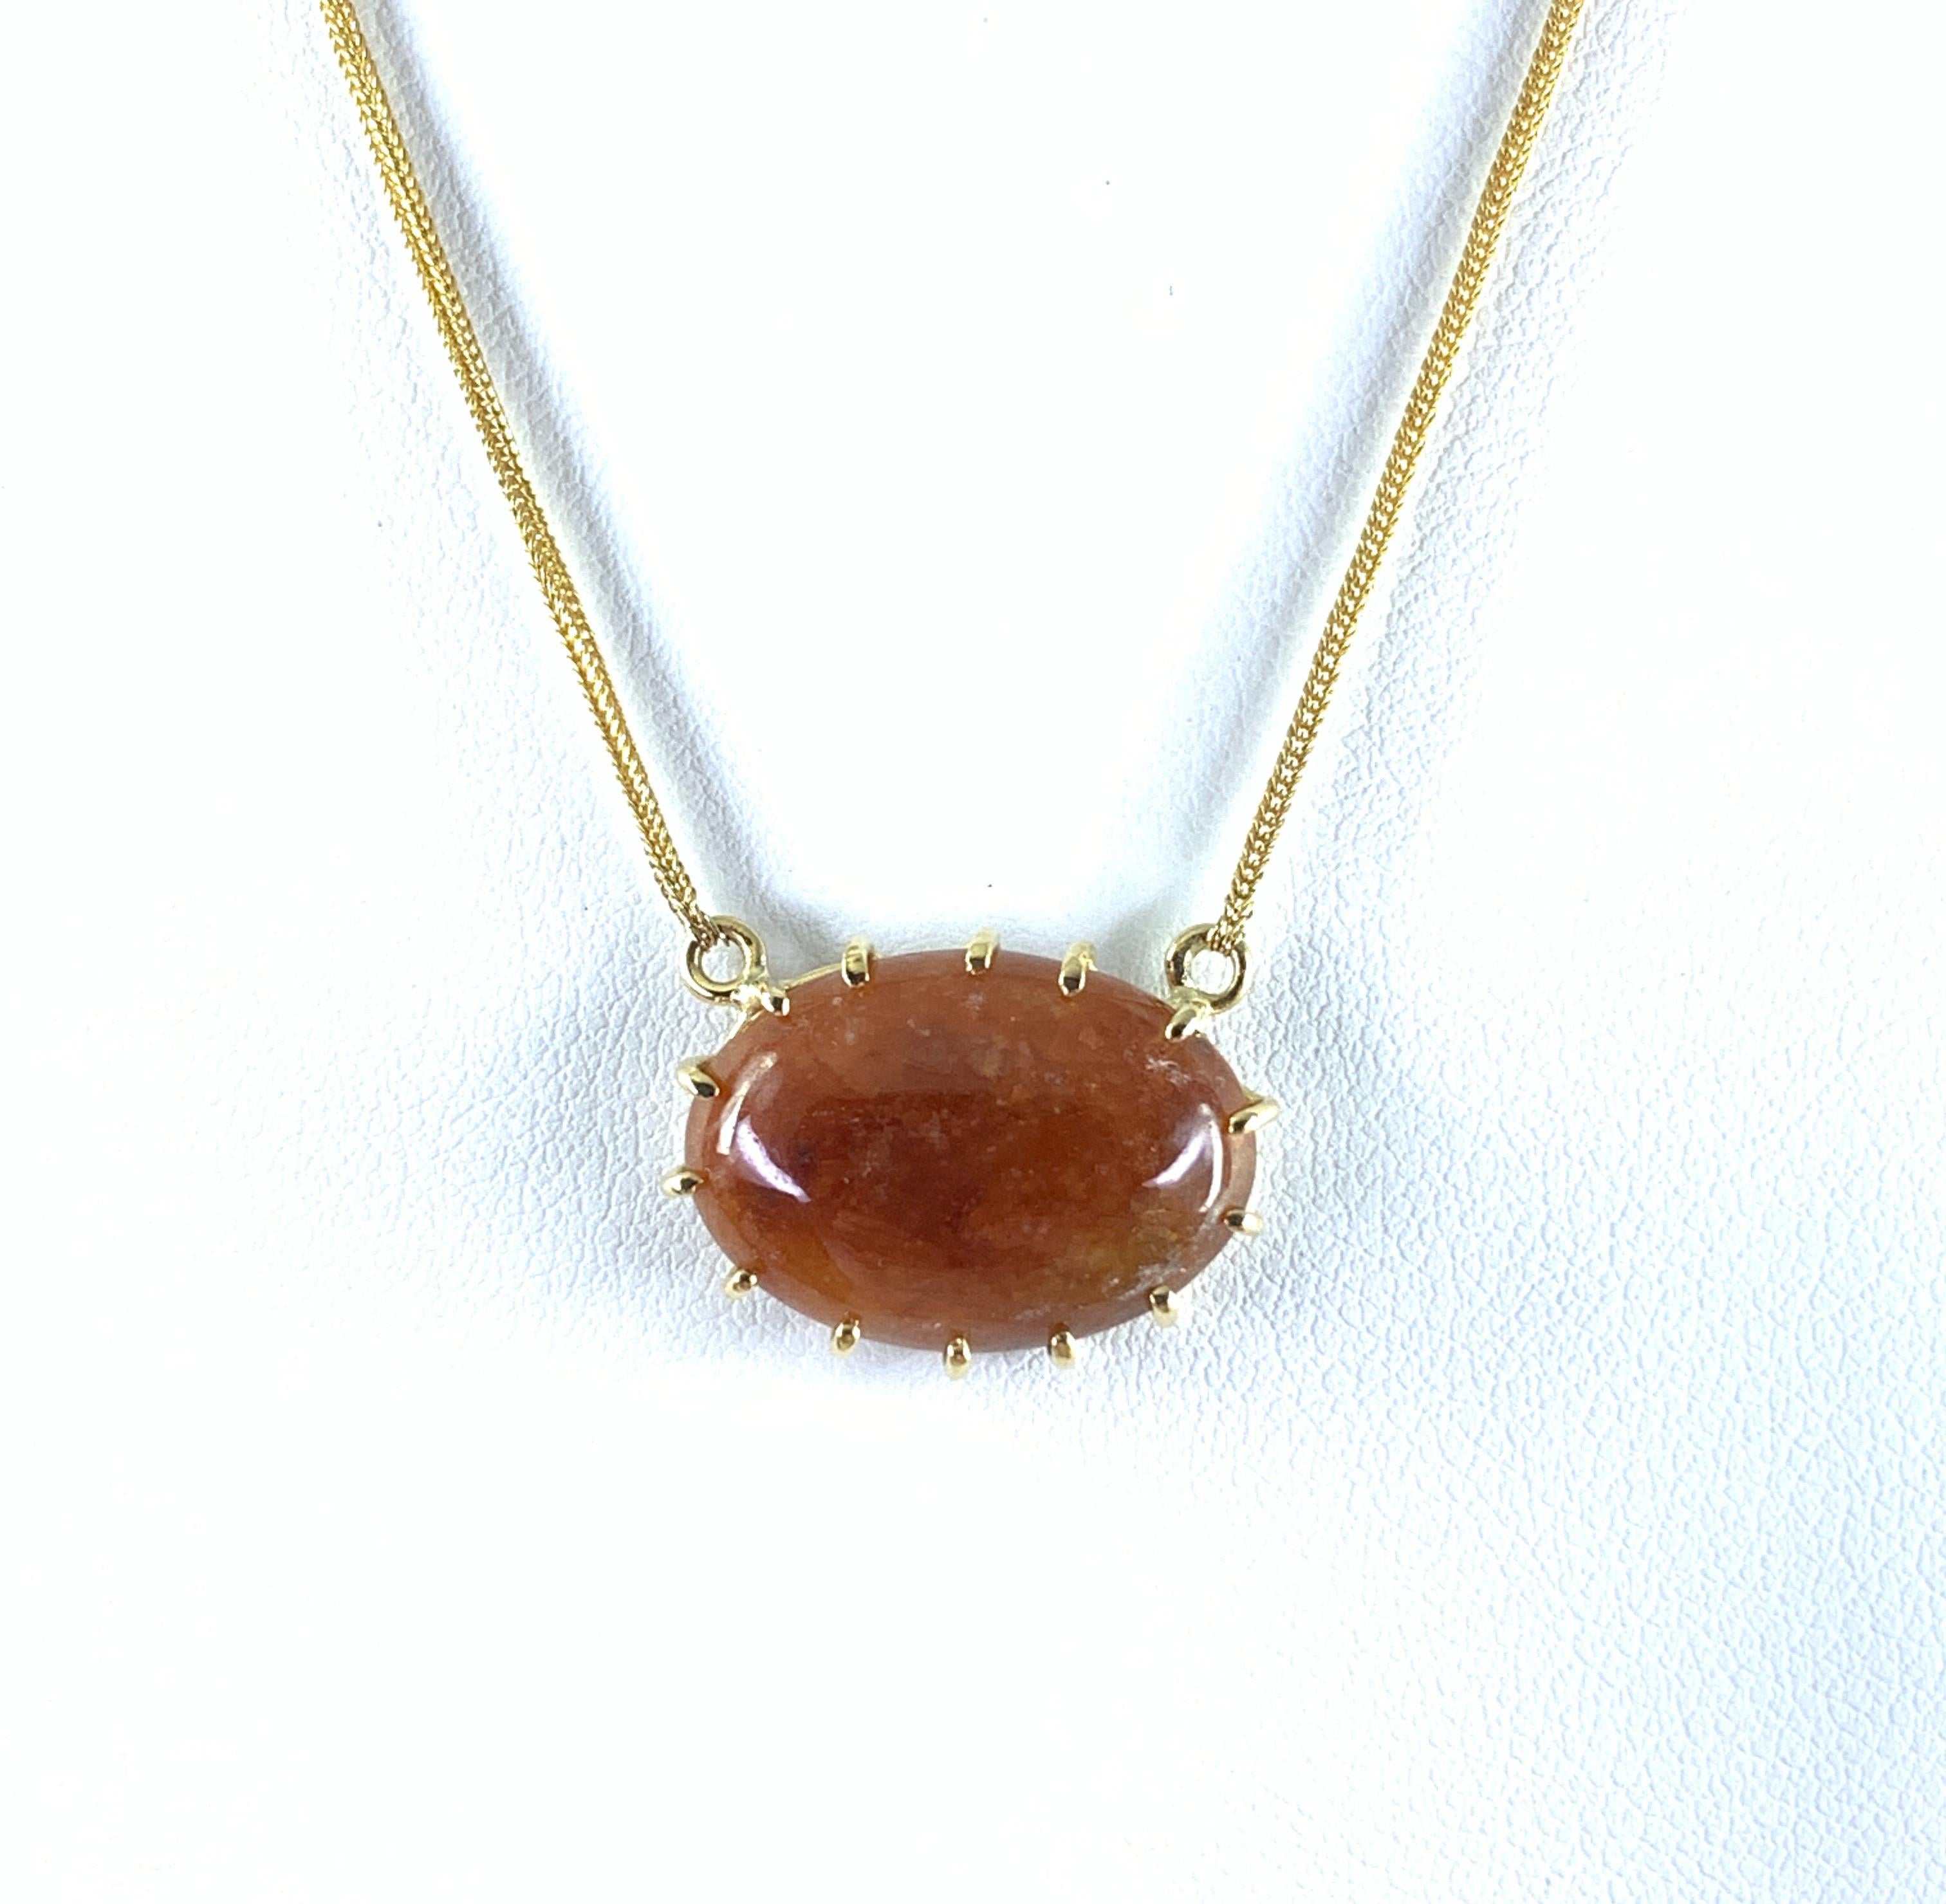 Women's or Men's Red-Brown Jadeite Cabochon Pendant on Snake Chain in 18 Karat Yellow Gold